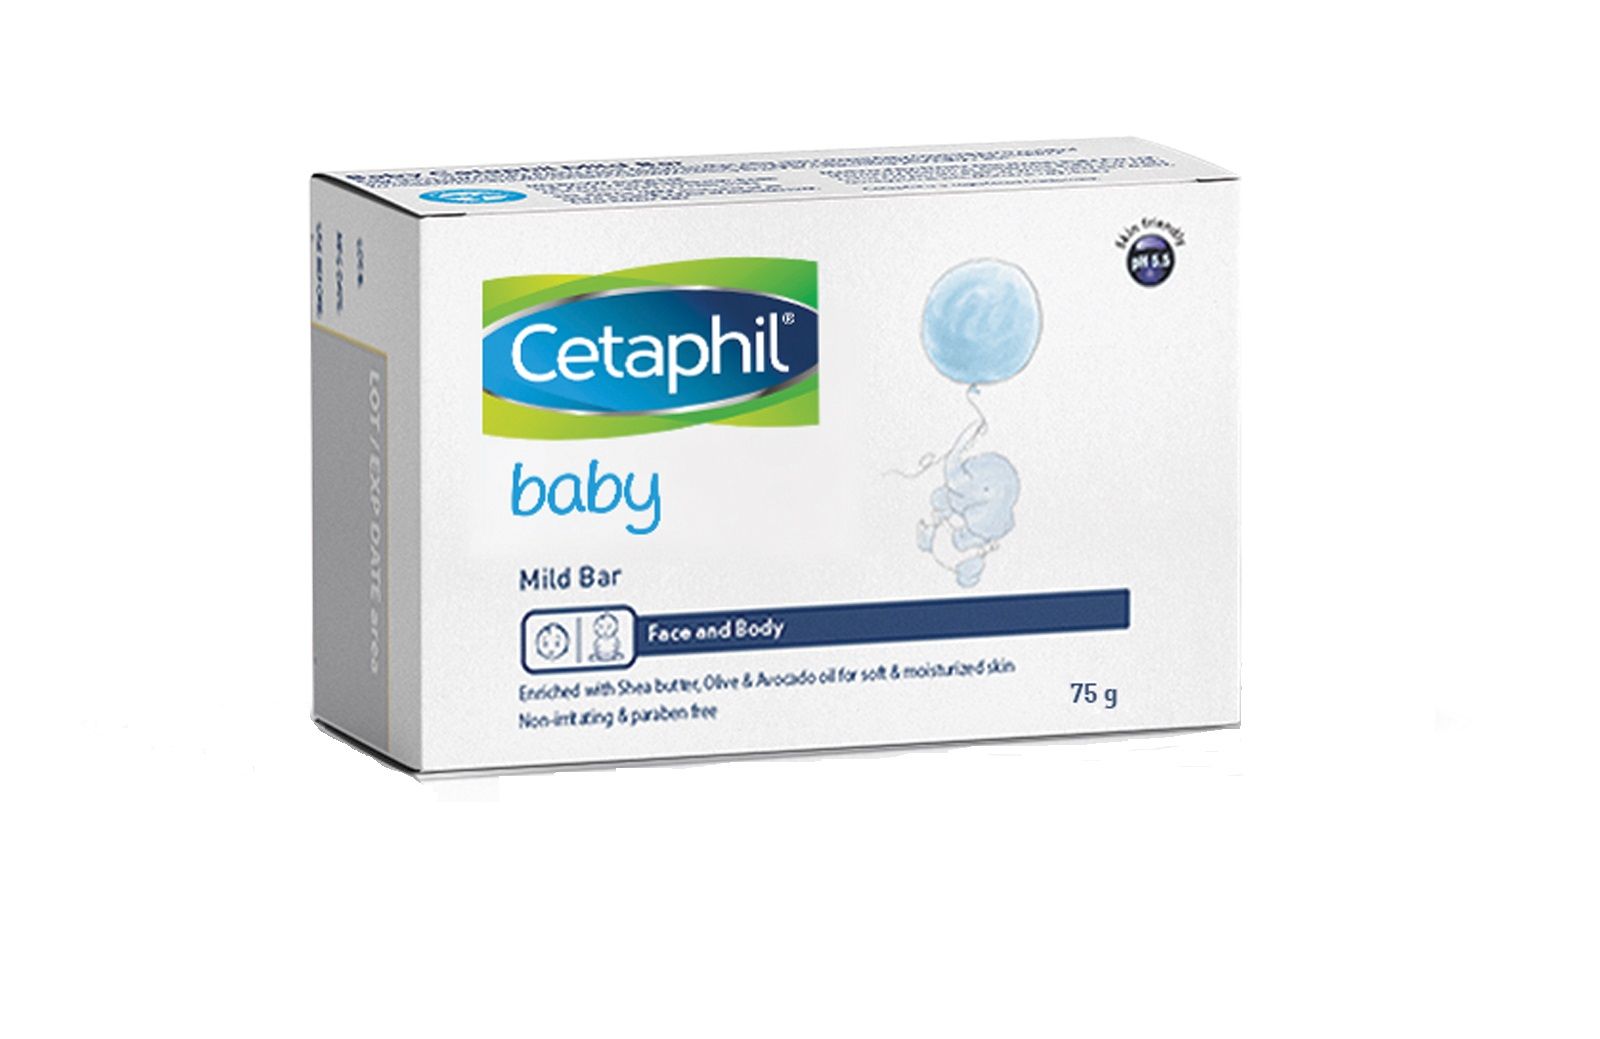 cetaphil soap bar for baby